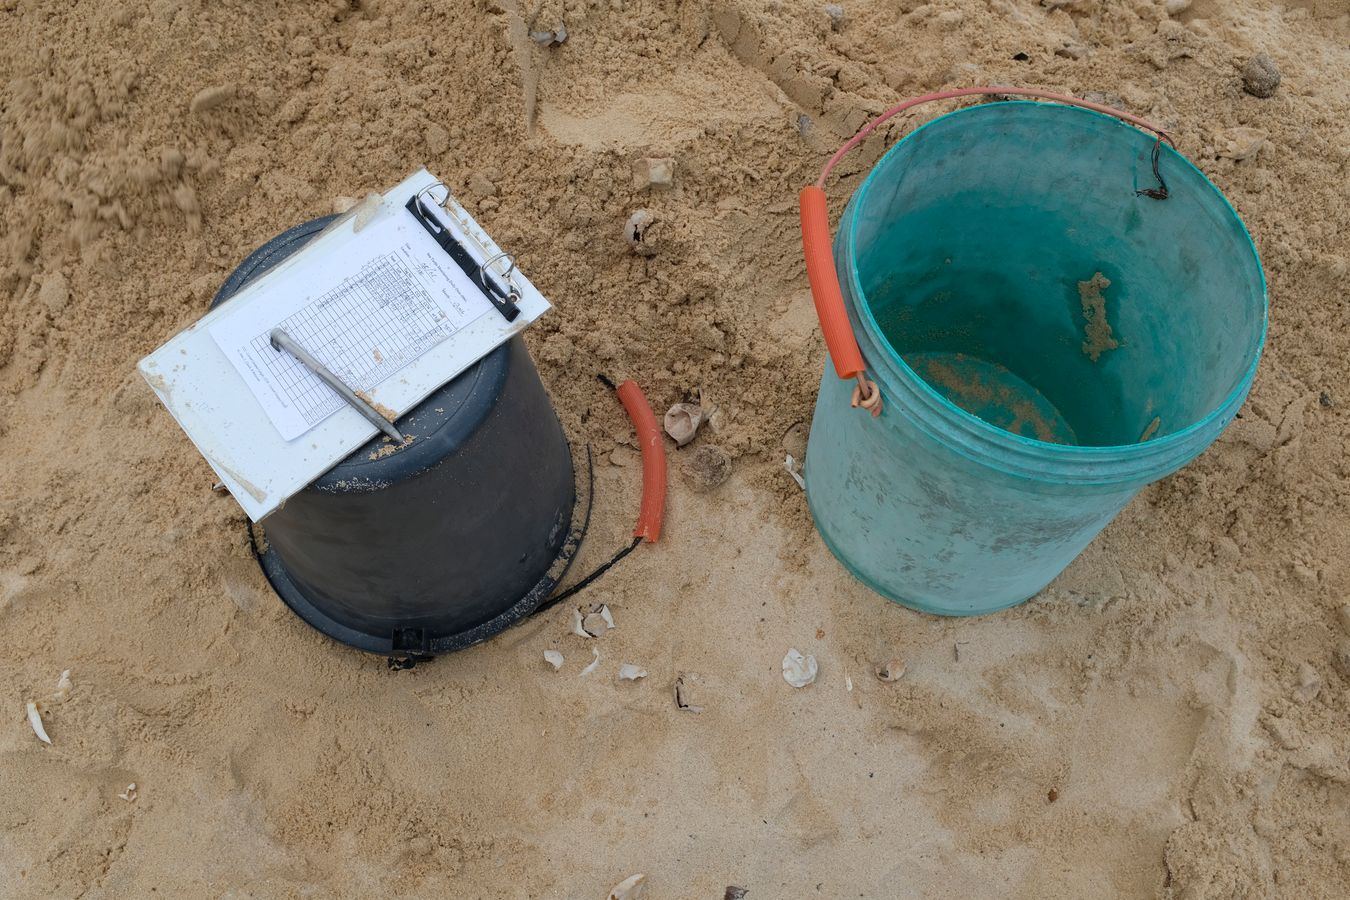 Sea turtle control notebook on buckets used to transport eggs from the nest on the beach to the hatchery.